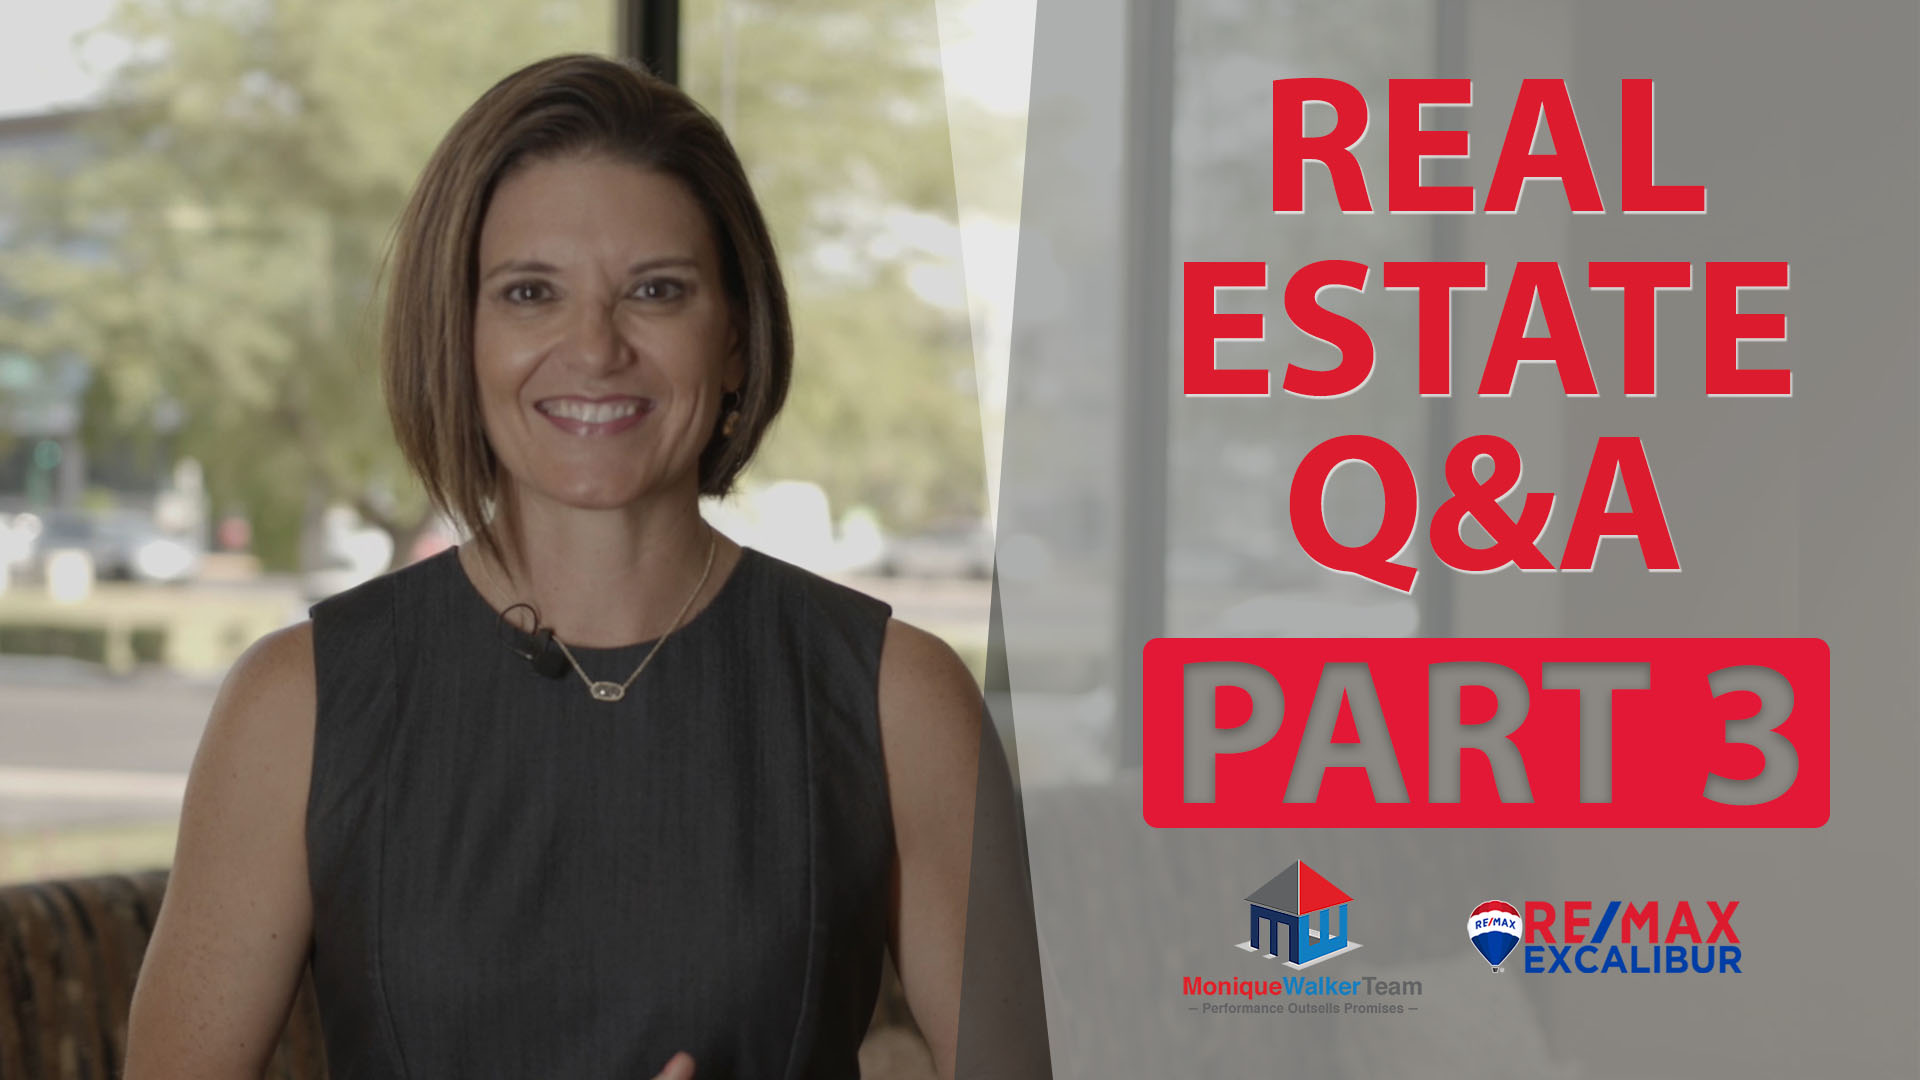 Answering 2 More Common Real Estate Questions